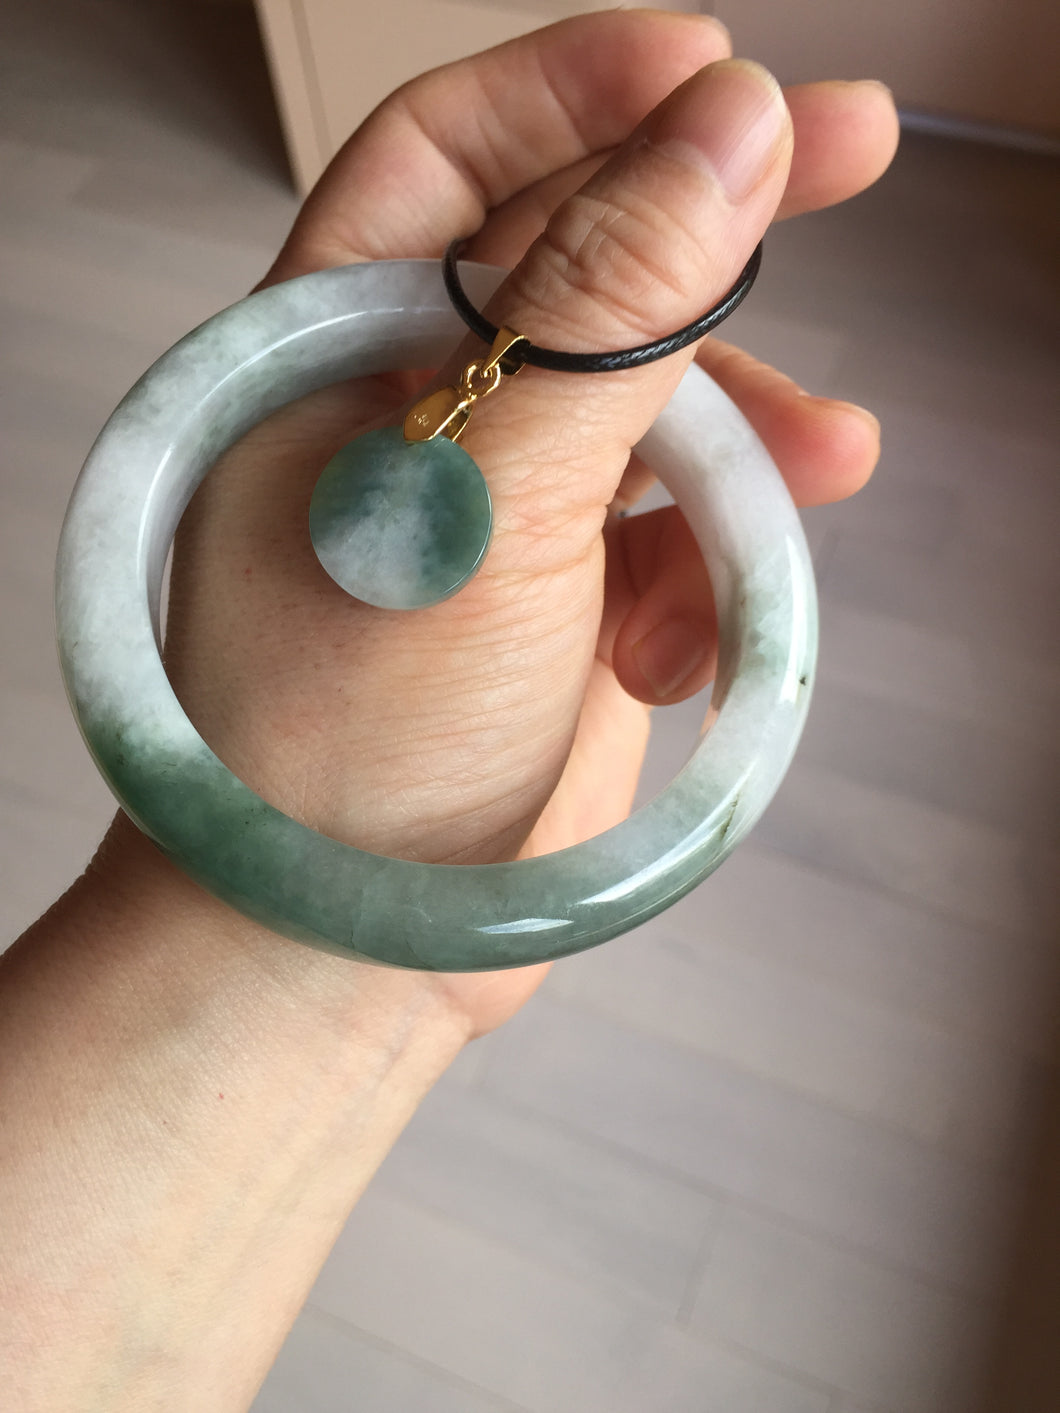 Fun fact: One of the advantage of my store, we have matching jade accessories for our bangles